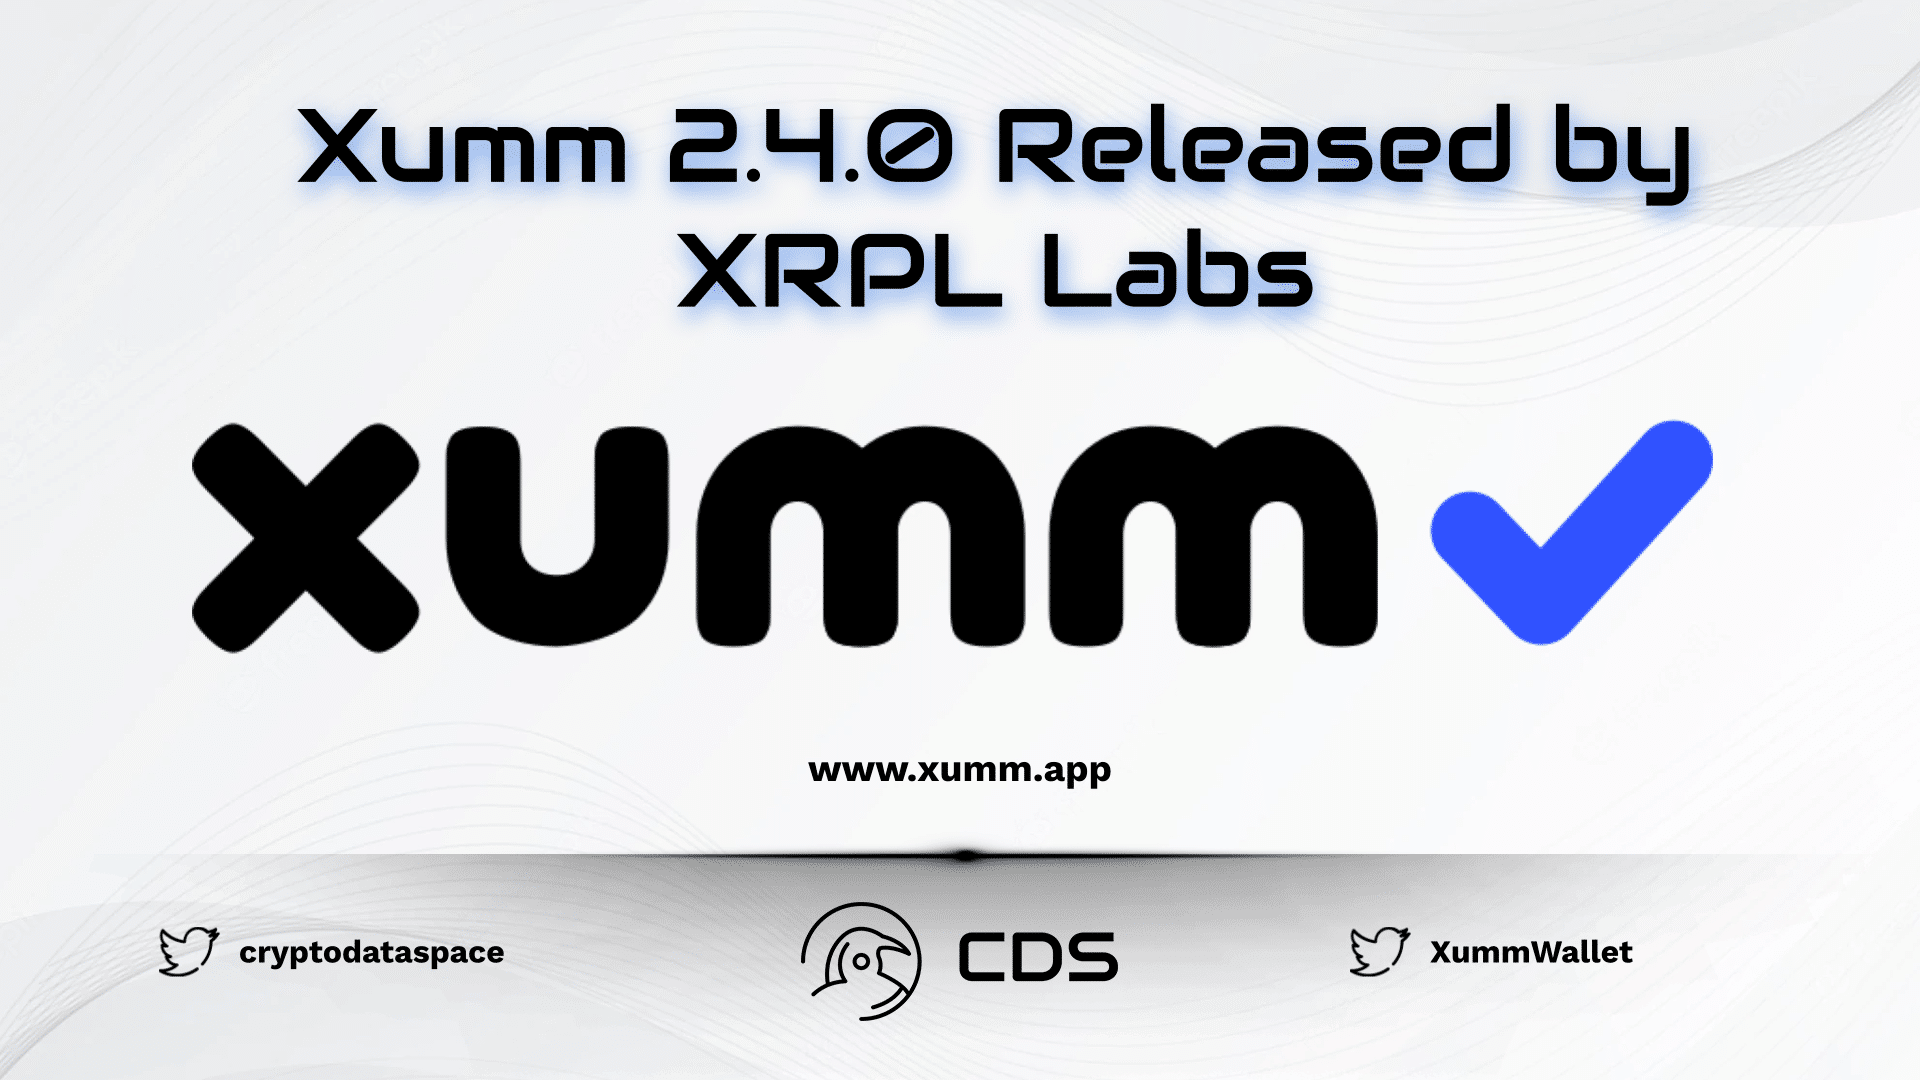 Xumm 2.4.0 Released by XRPL Labs